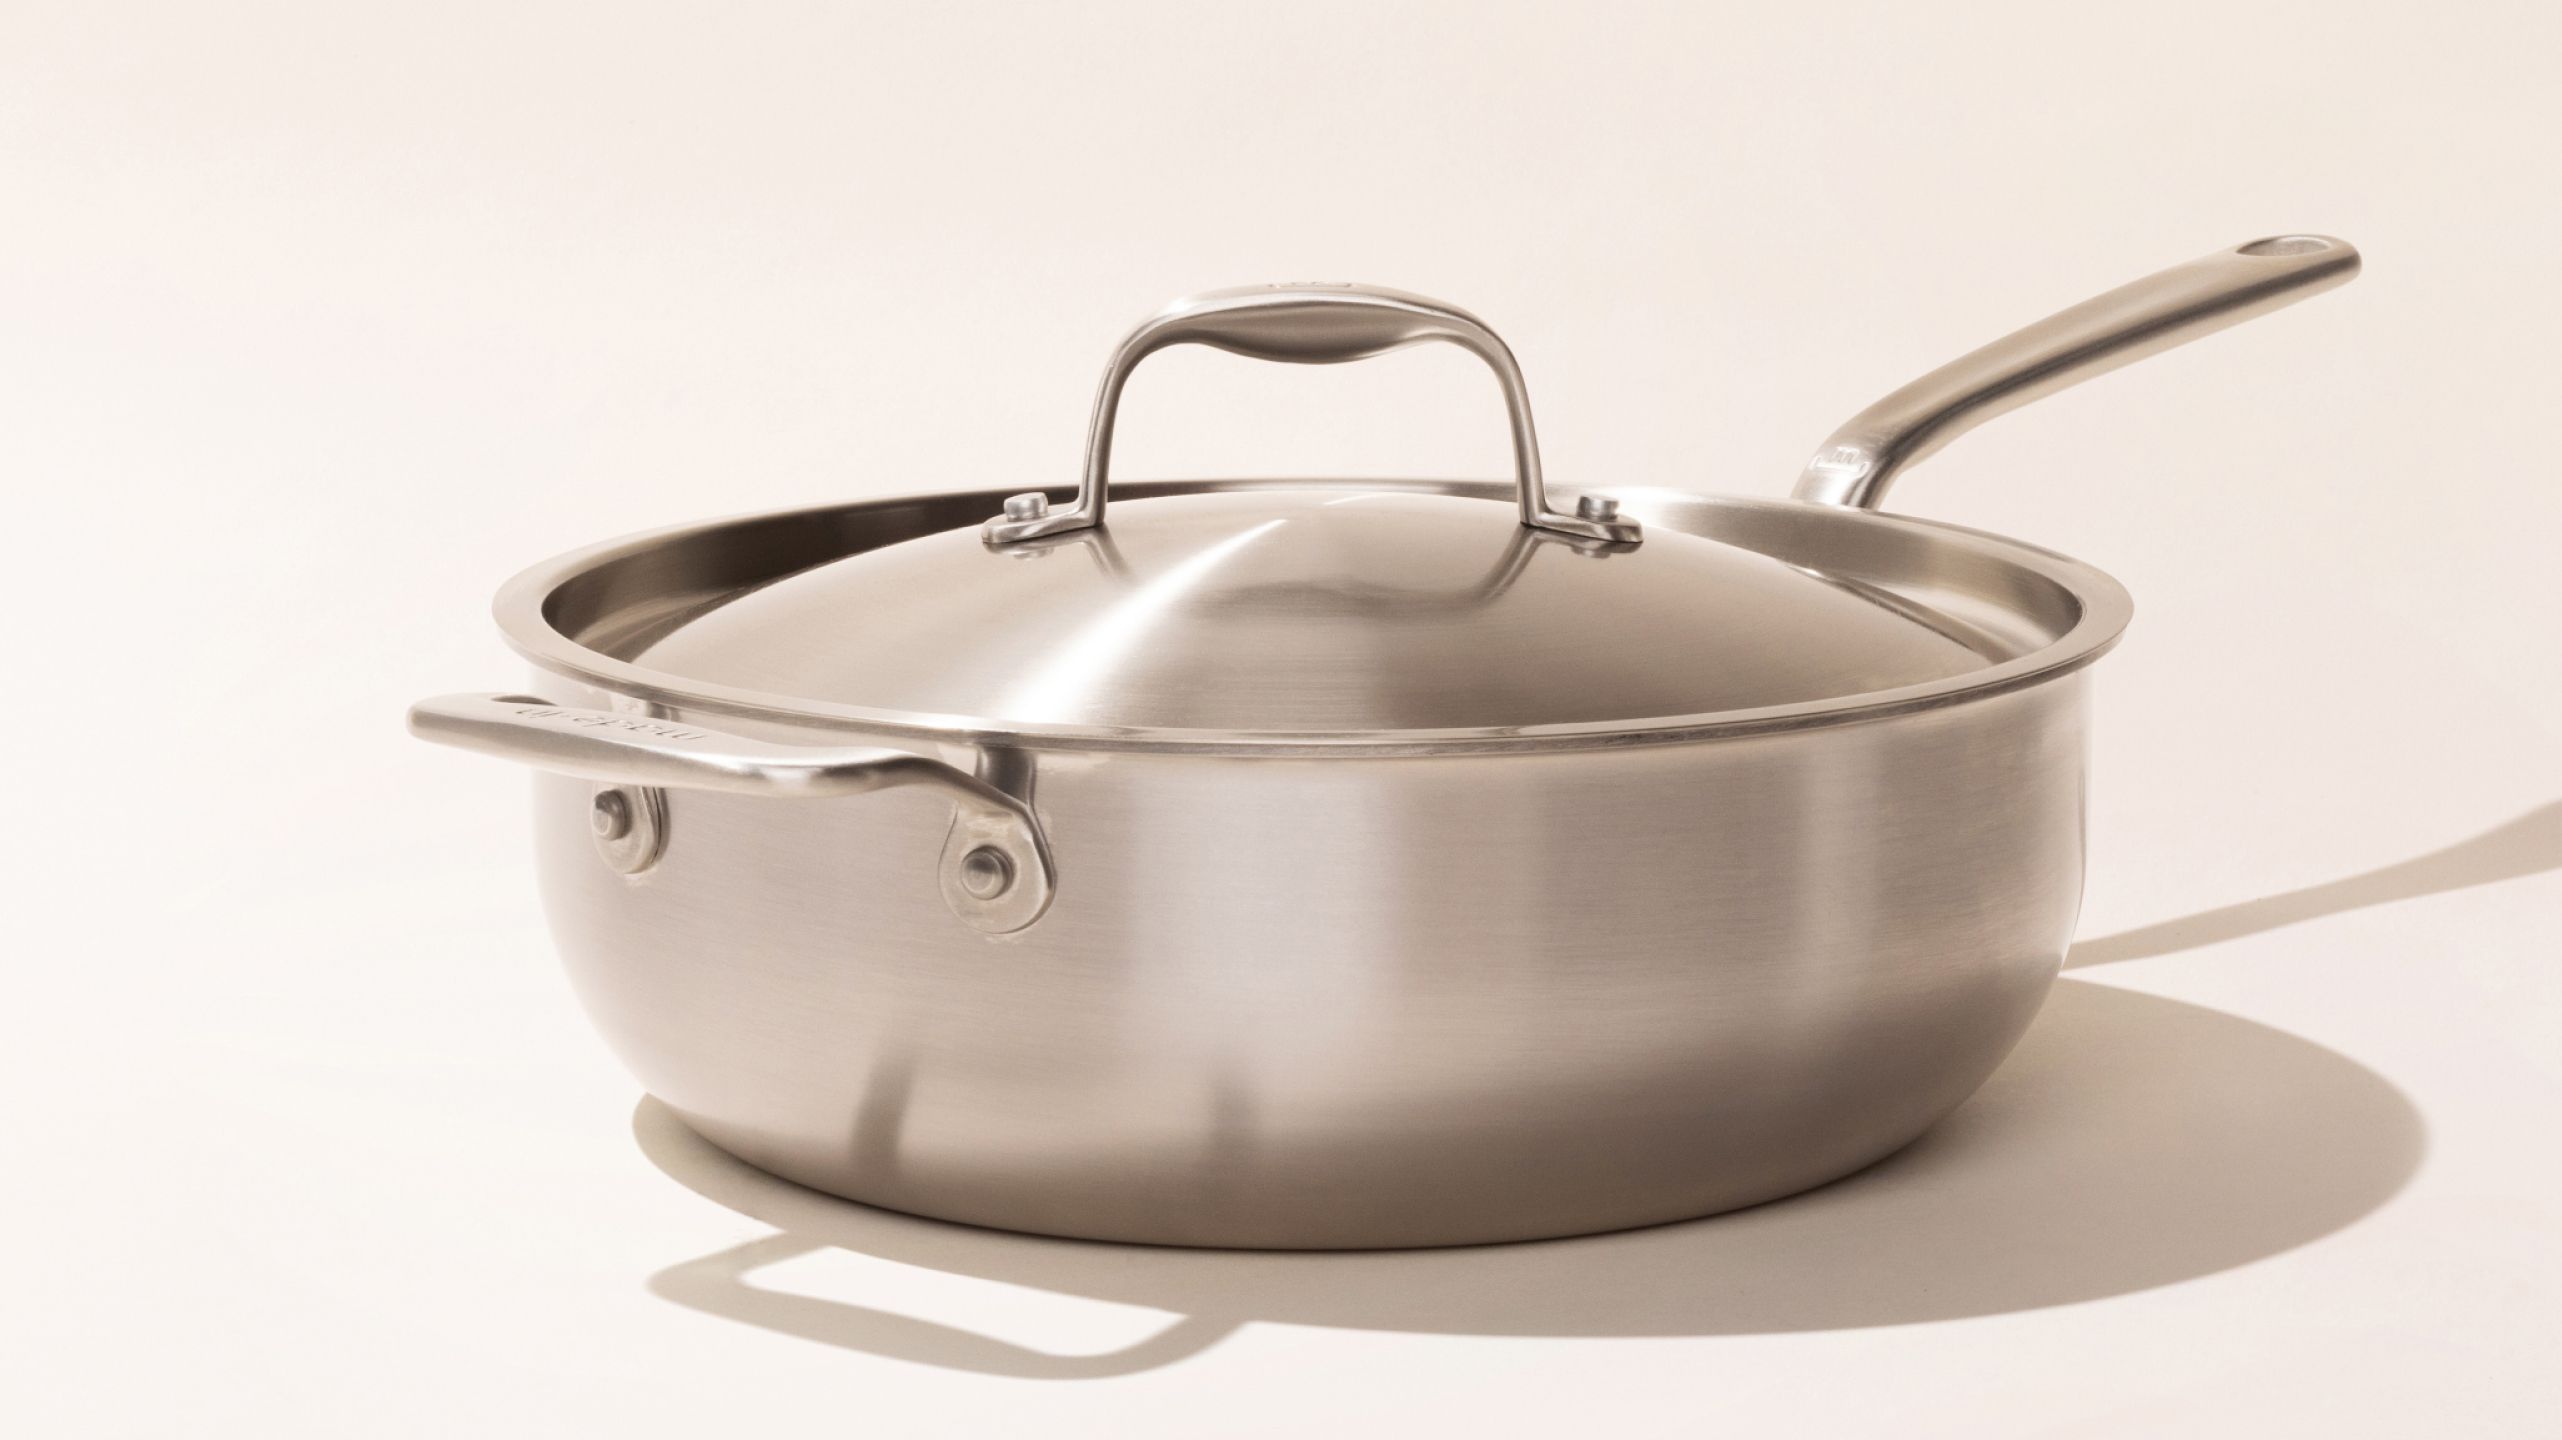 Bistro 6-Quart Stainless Dutch Oven with Lid, Metallic Sold by at Home